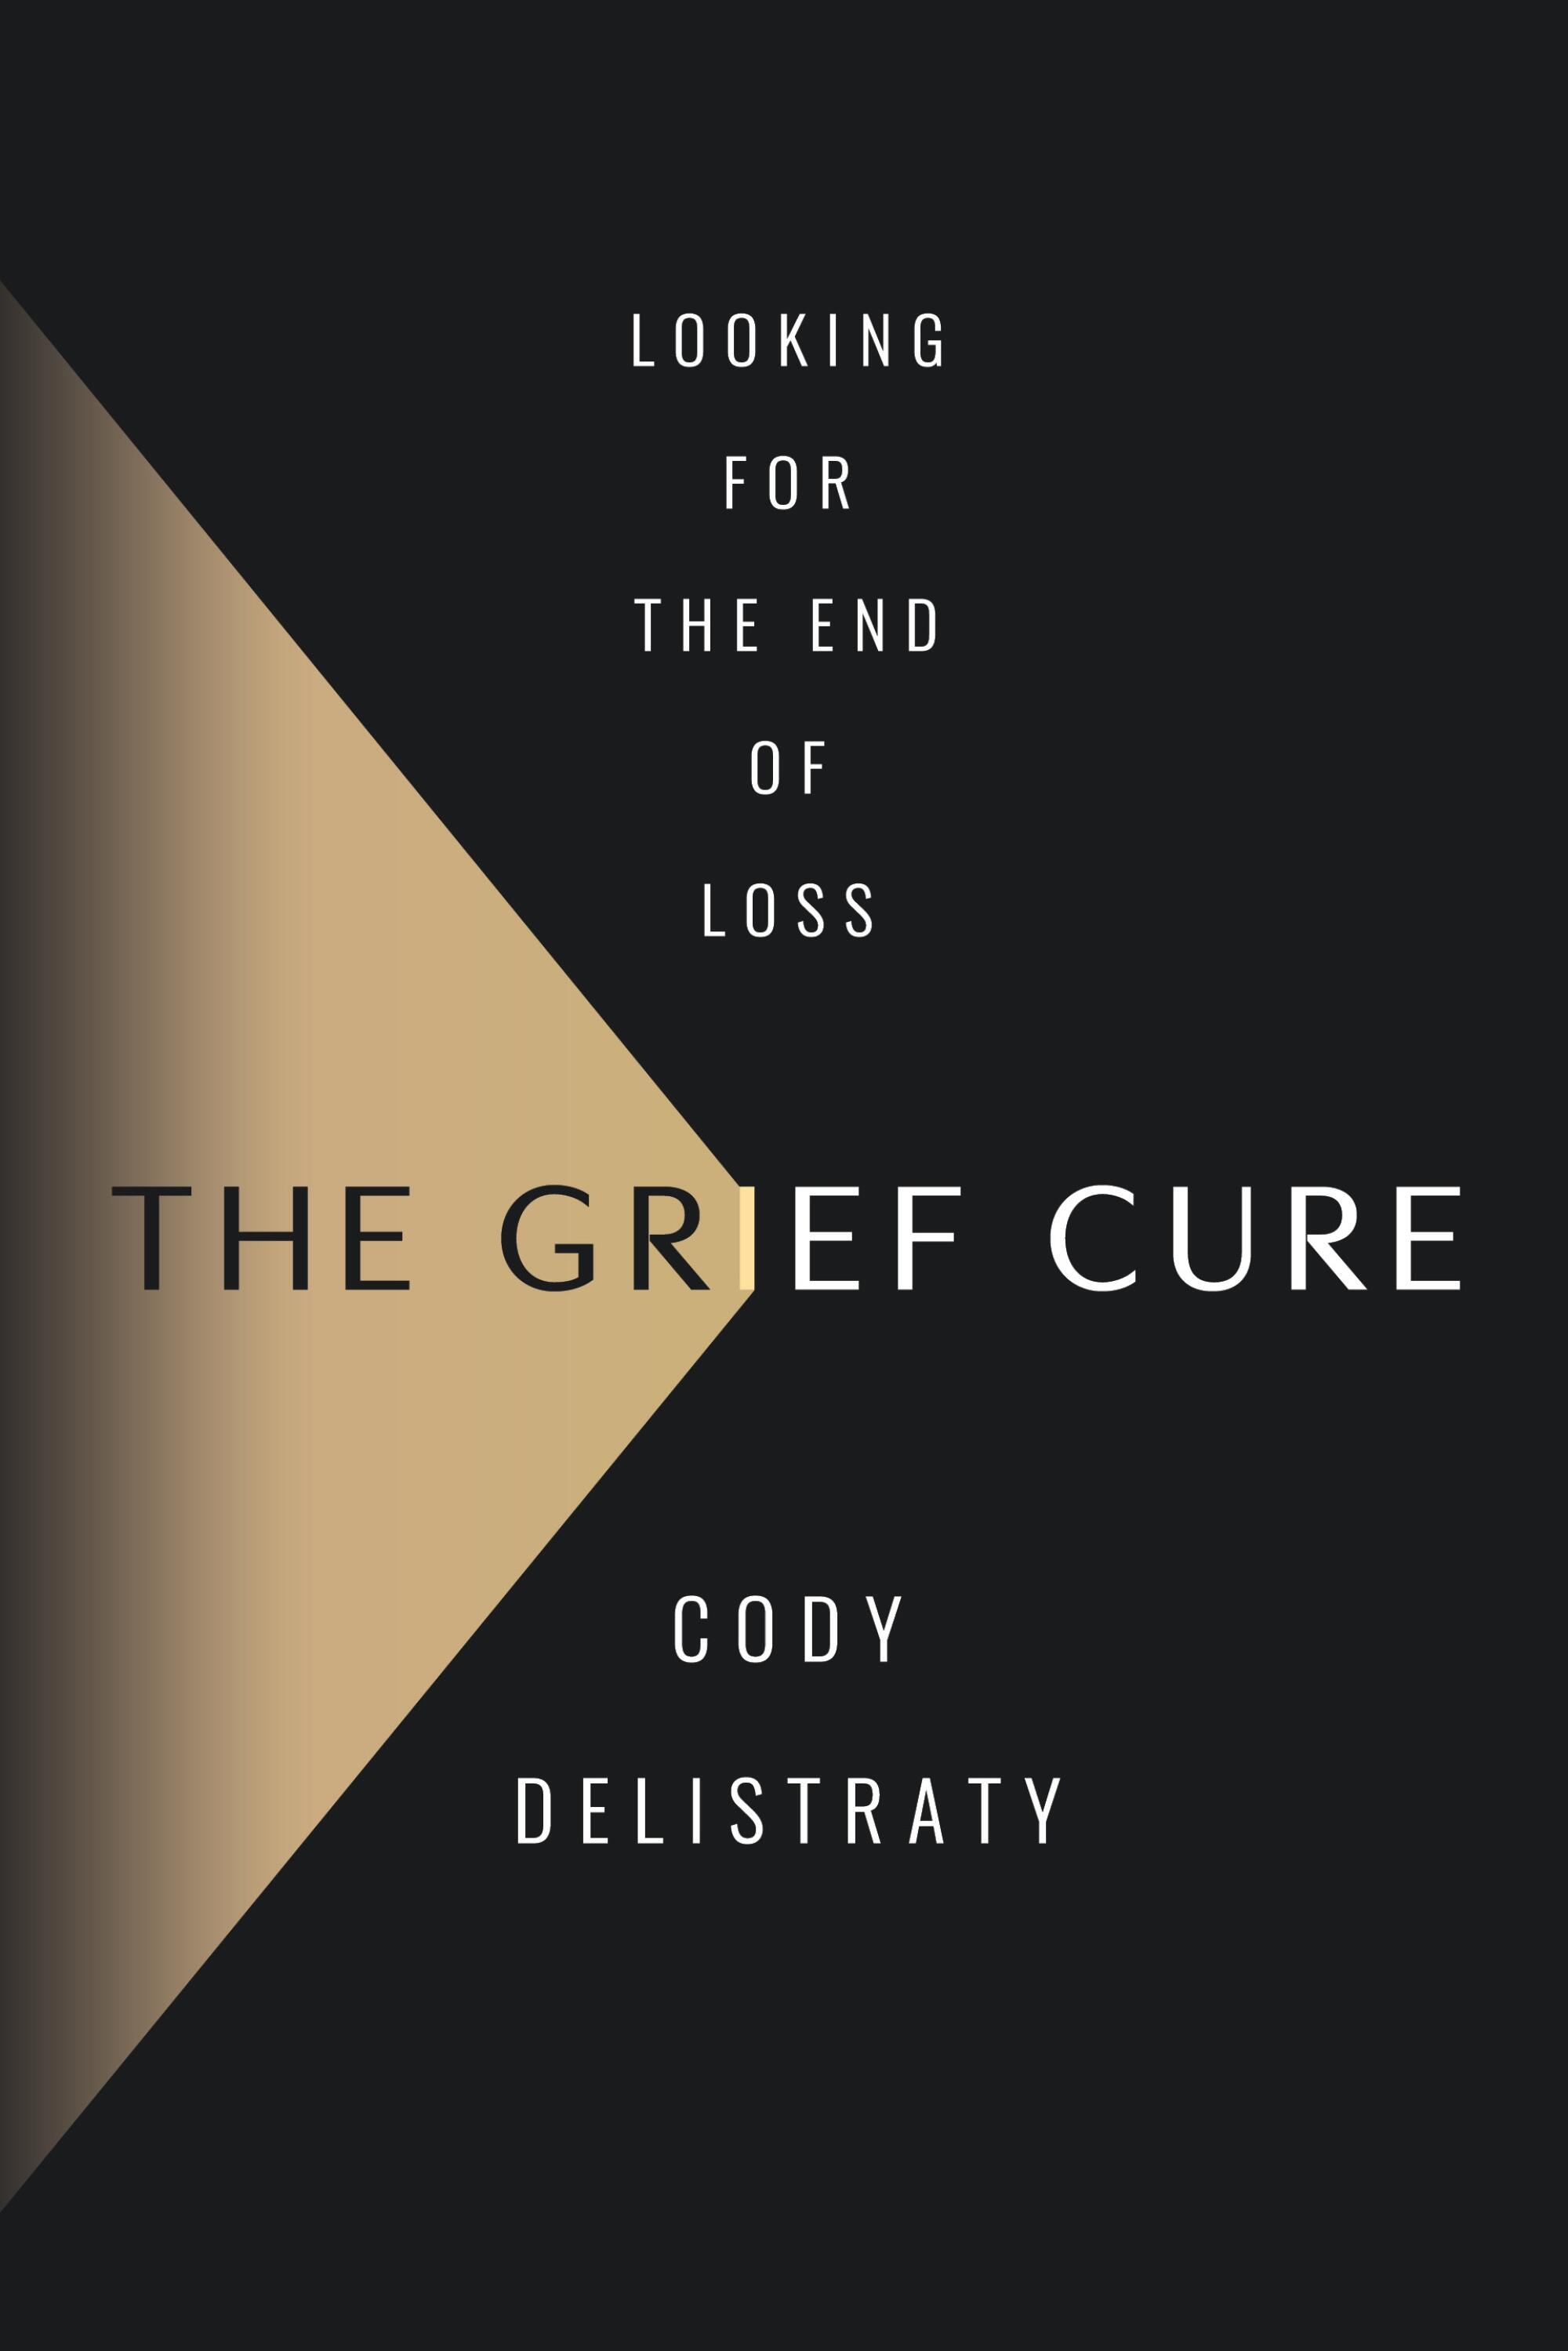 dust jacket for "The cure for grief" by Cody Delistraty